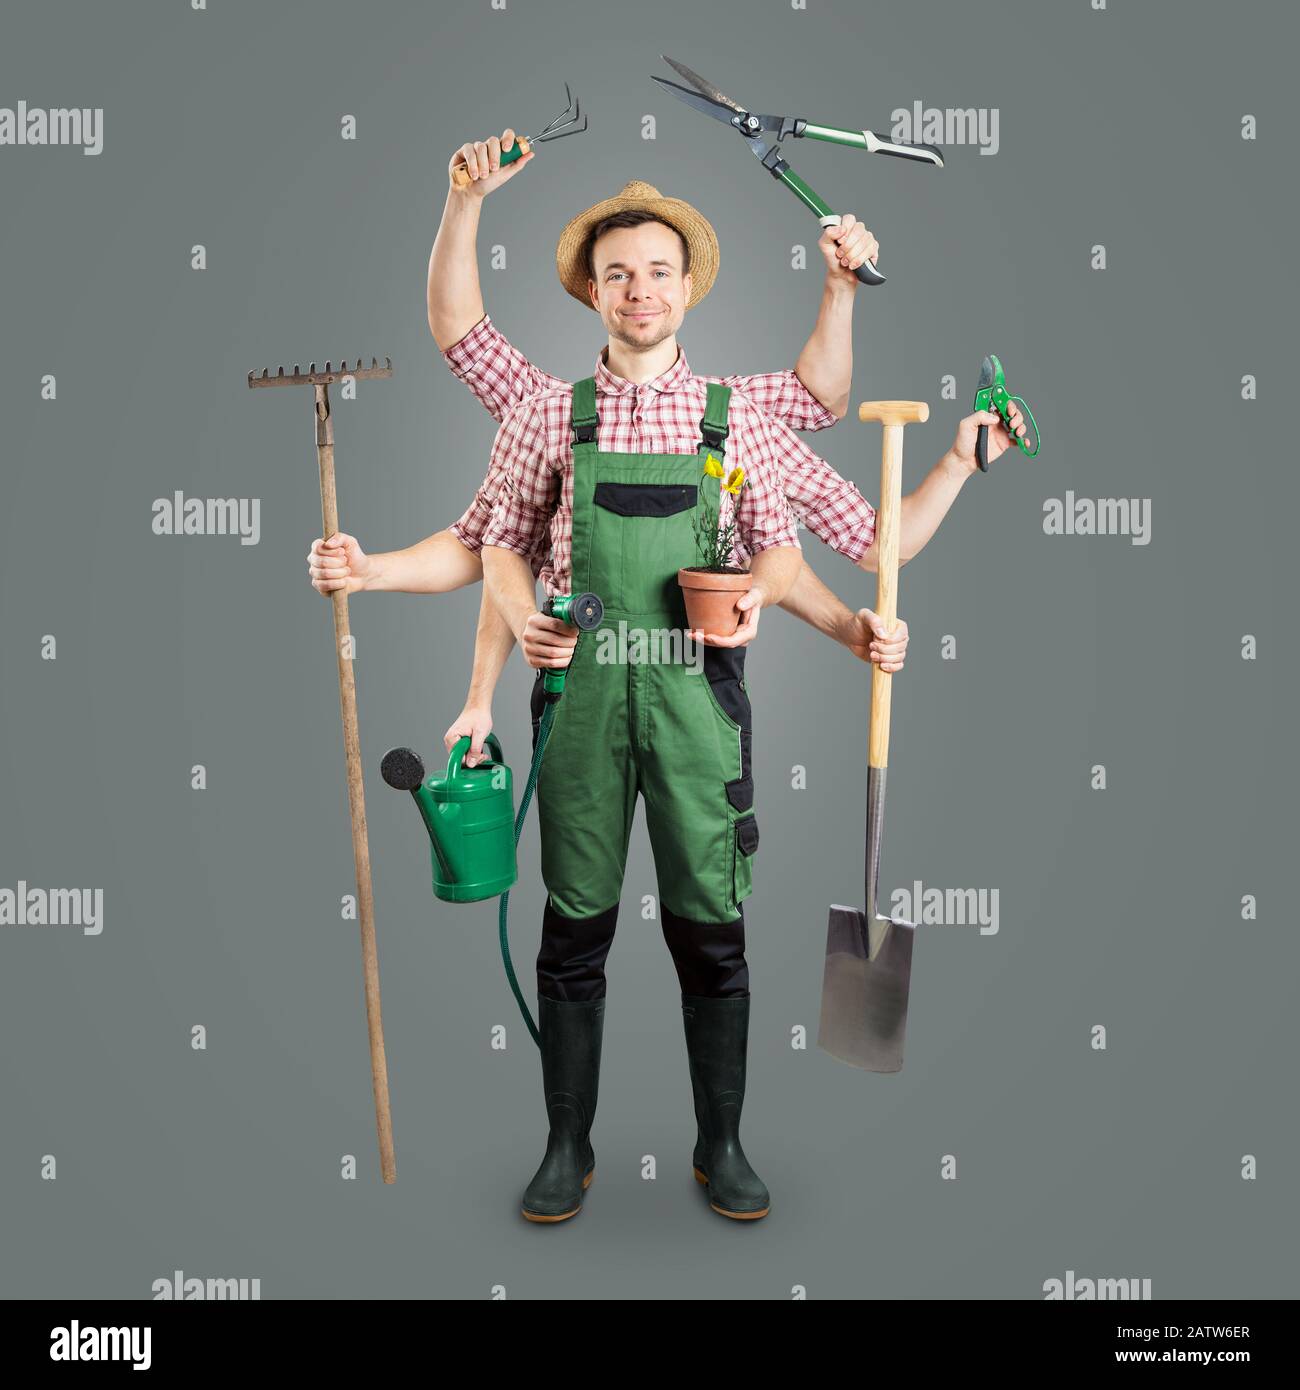 Happpy gardener with multiple arms and tools Stock Photo